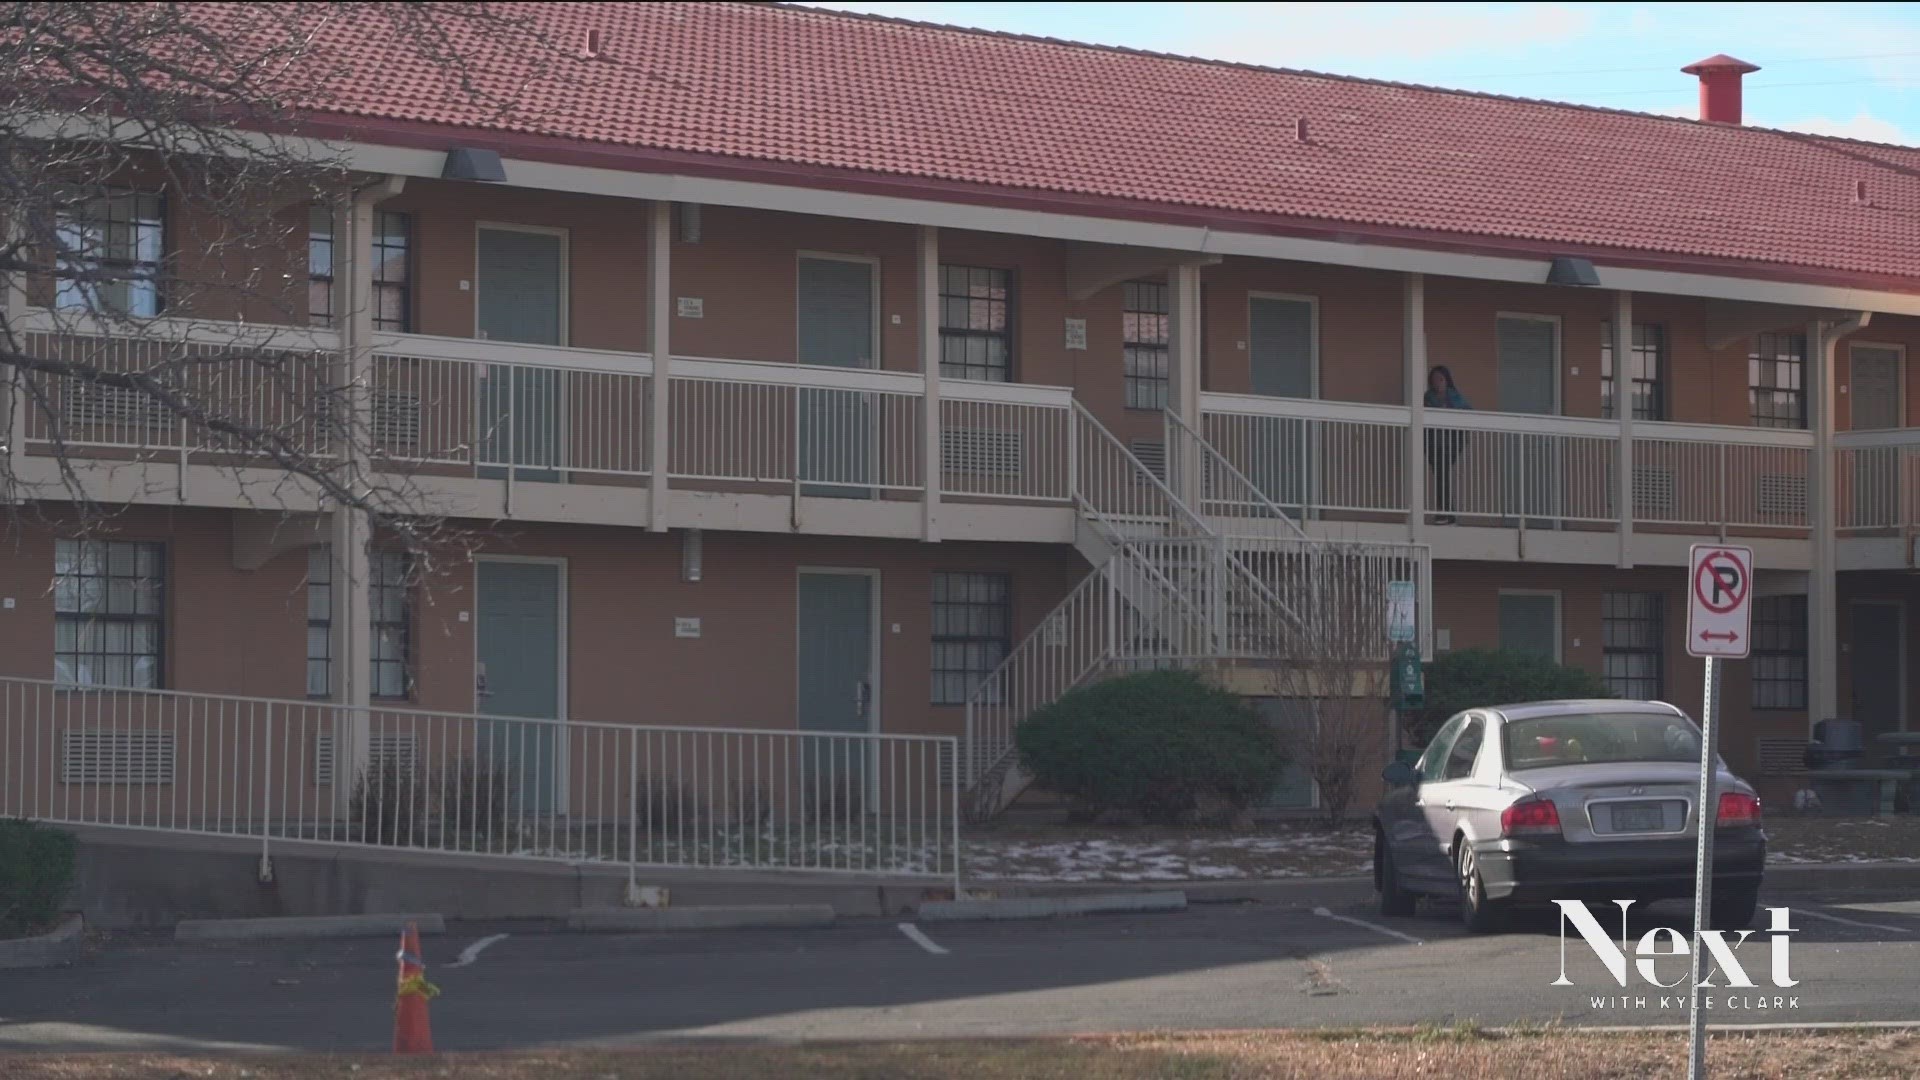 The hotel in Aurora was leased by the City of Denver and now houses 400 migrants.